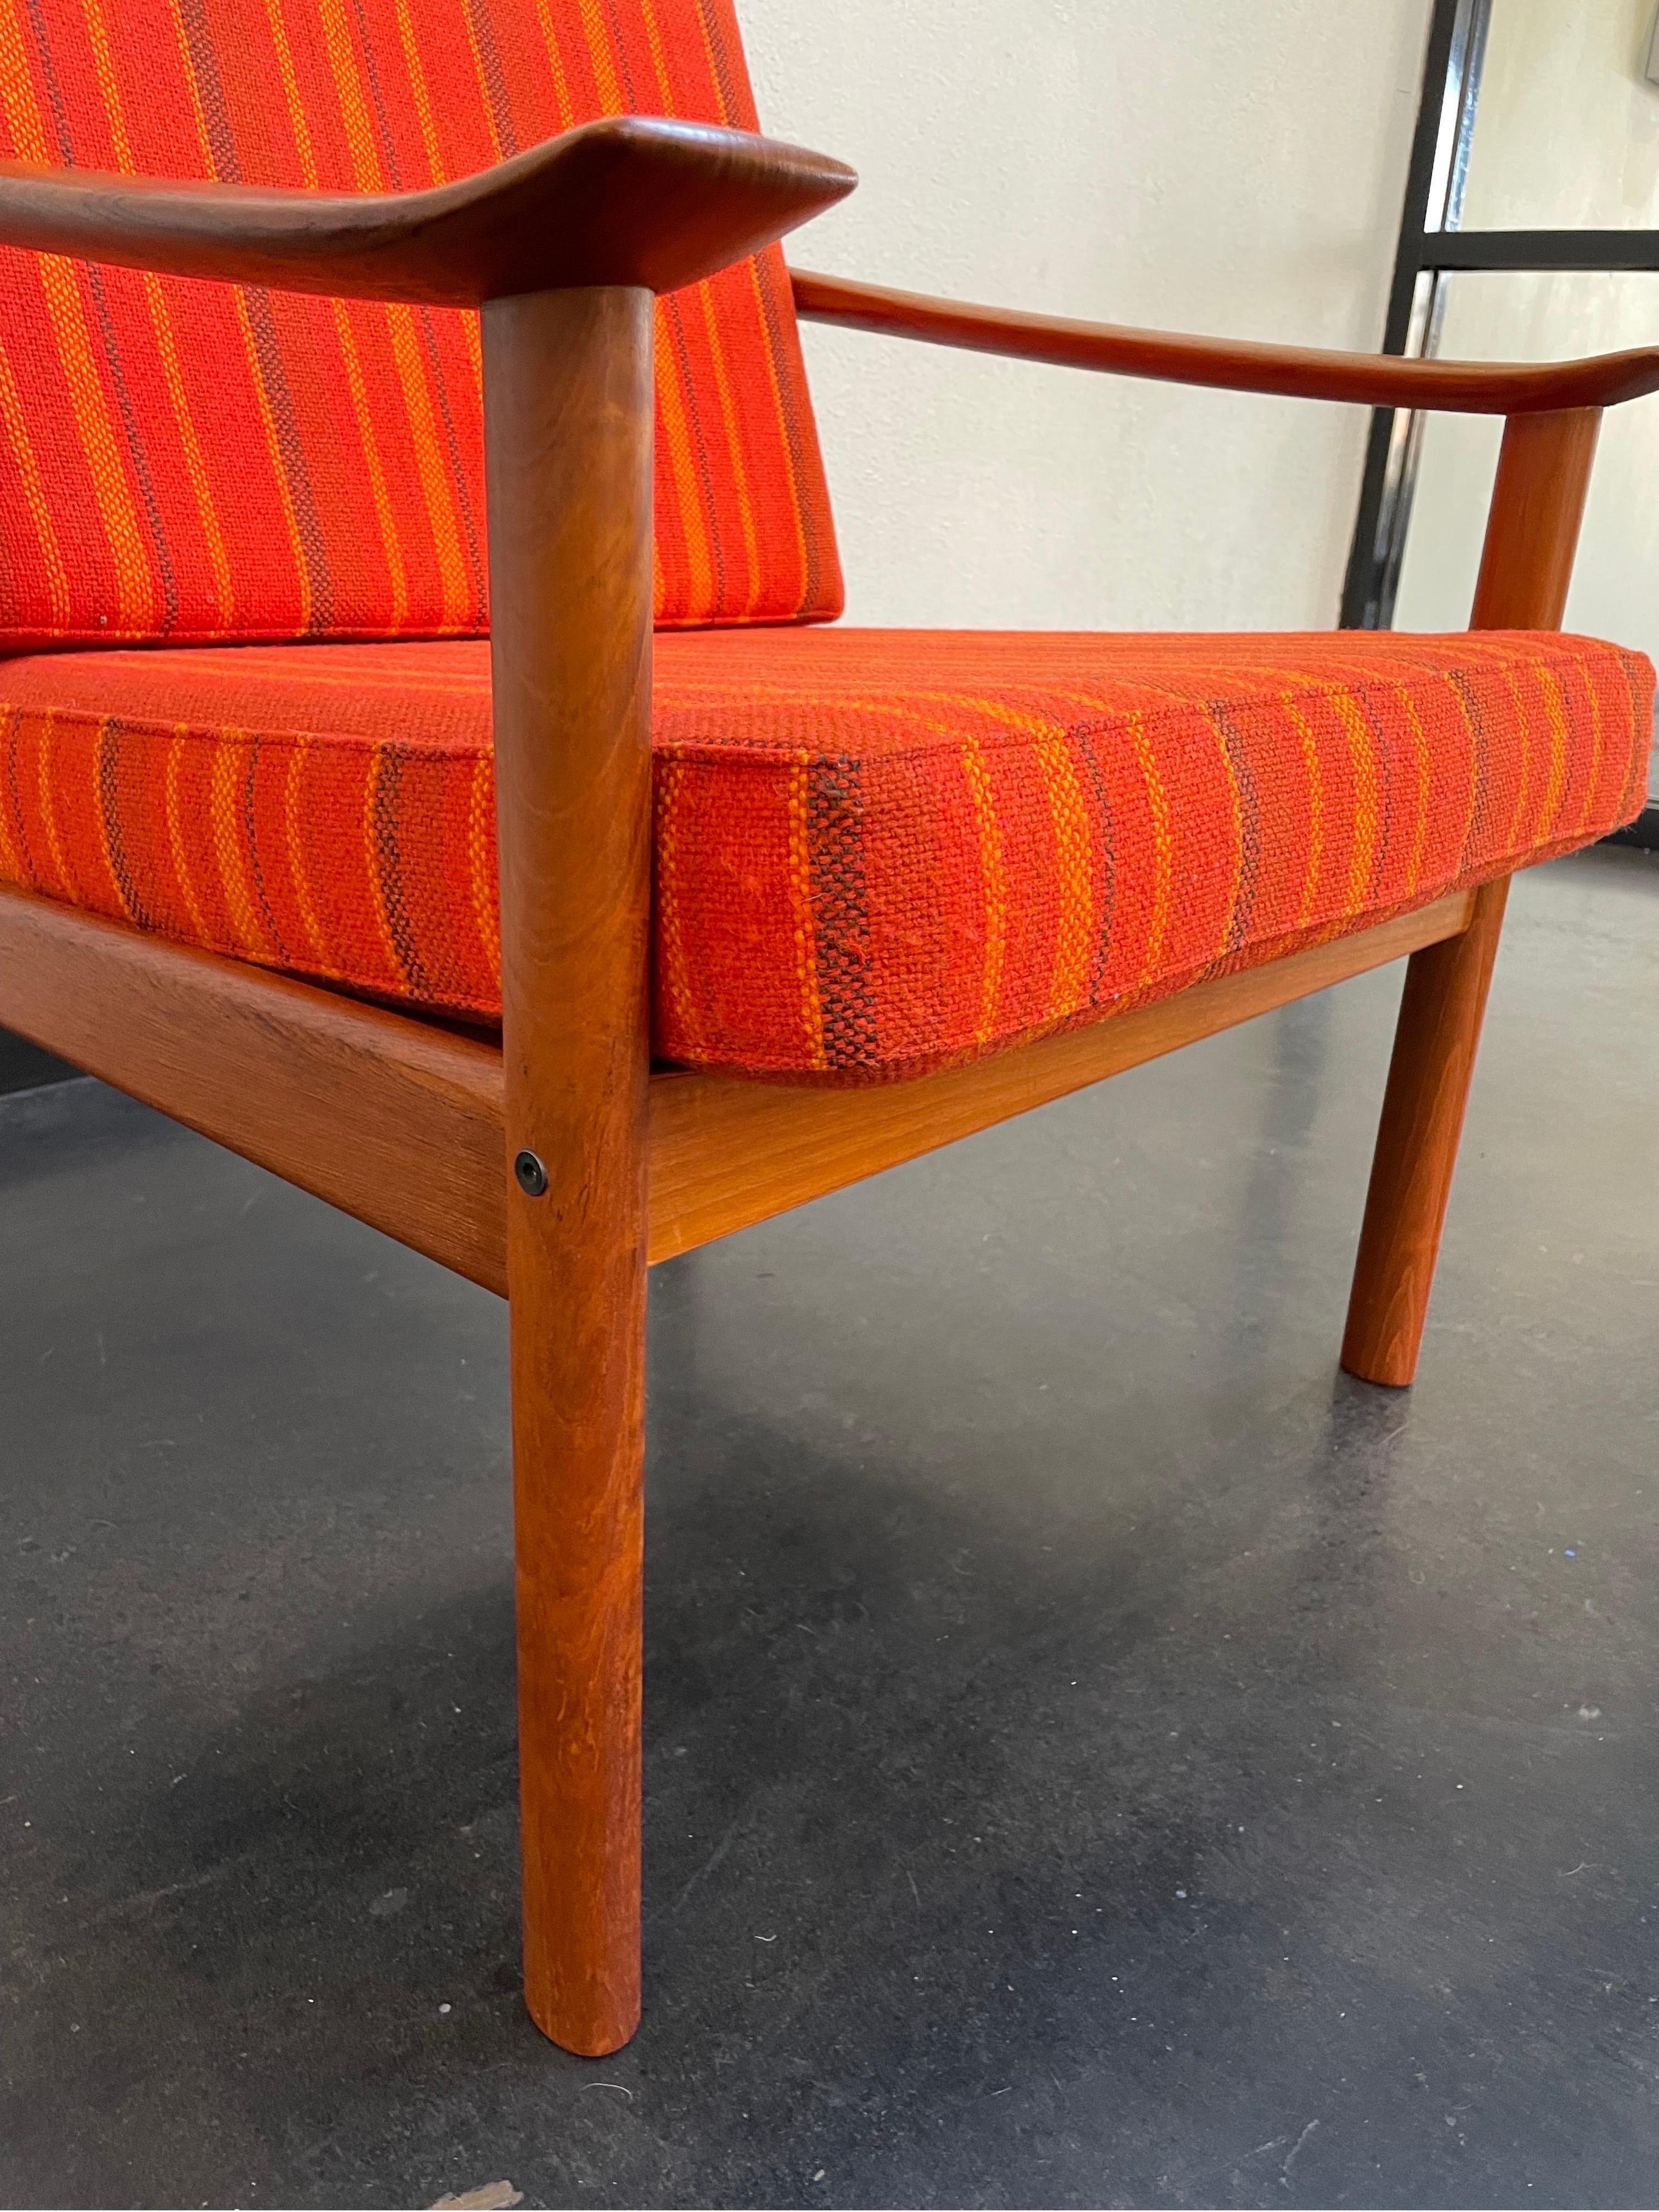 20th Century Peter Hvidt Danish Modern Lounge Chair For Sale